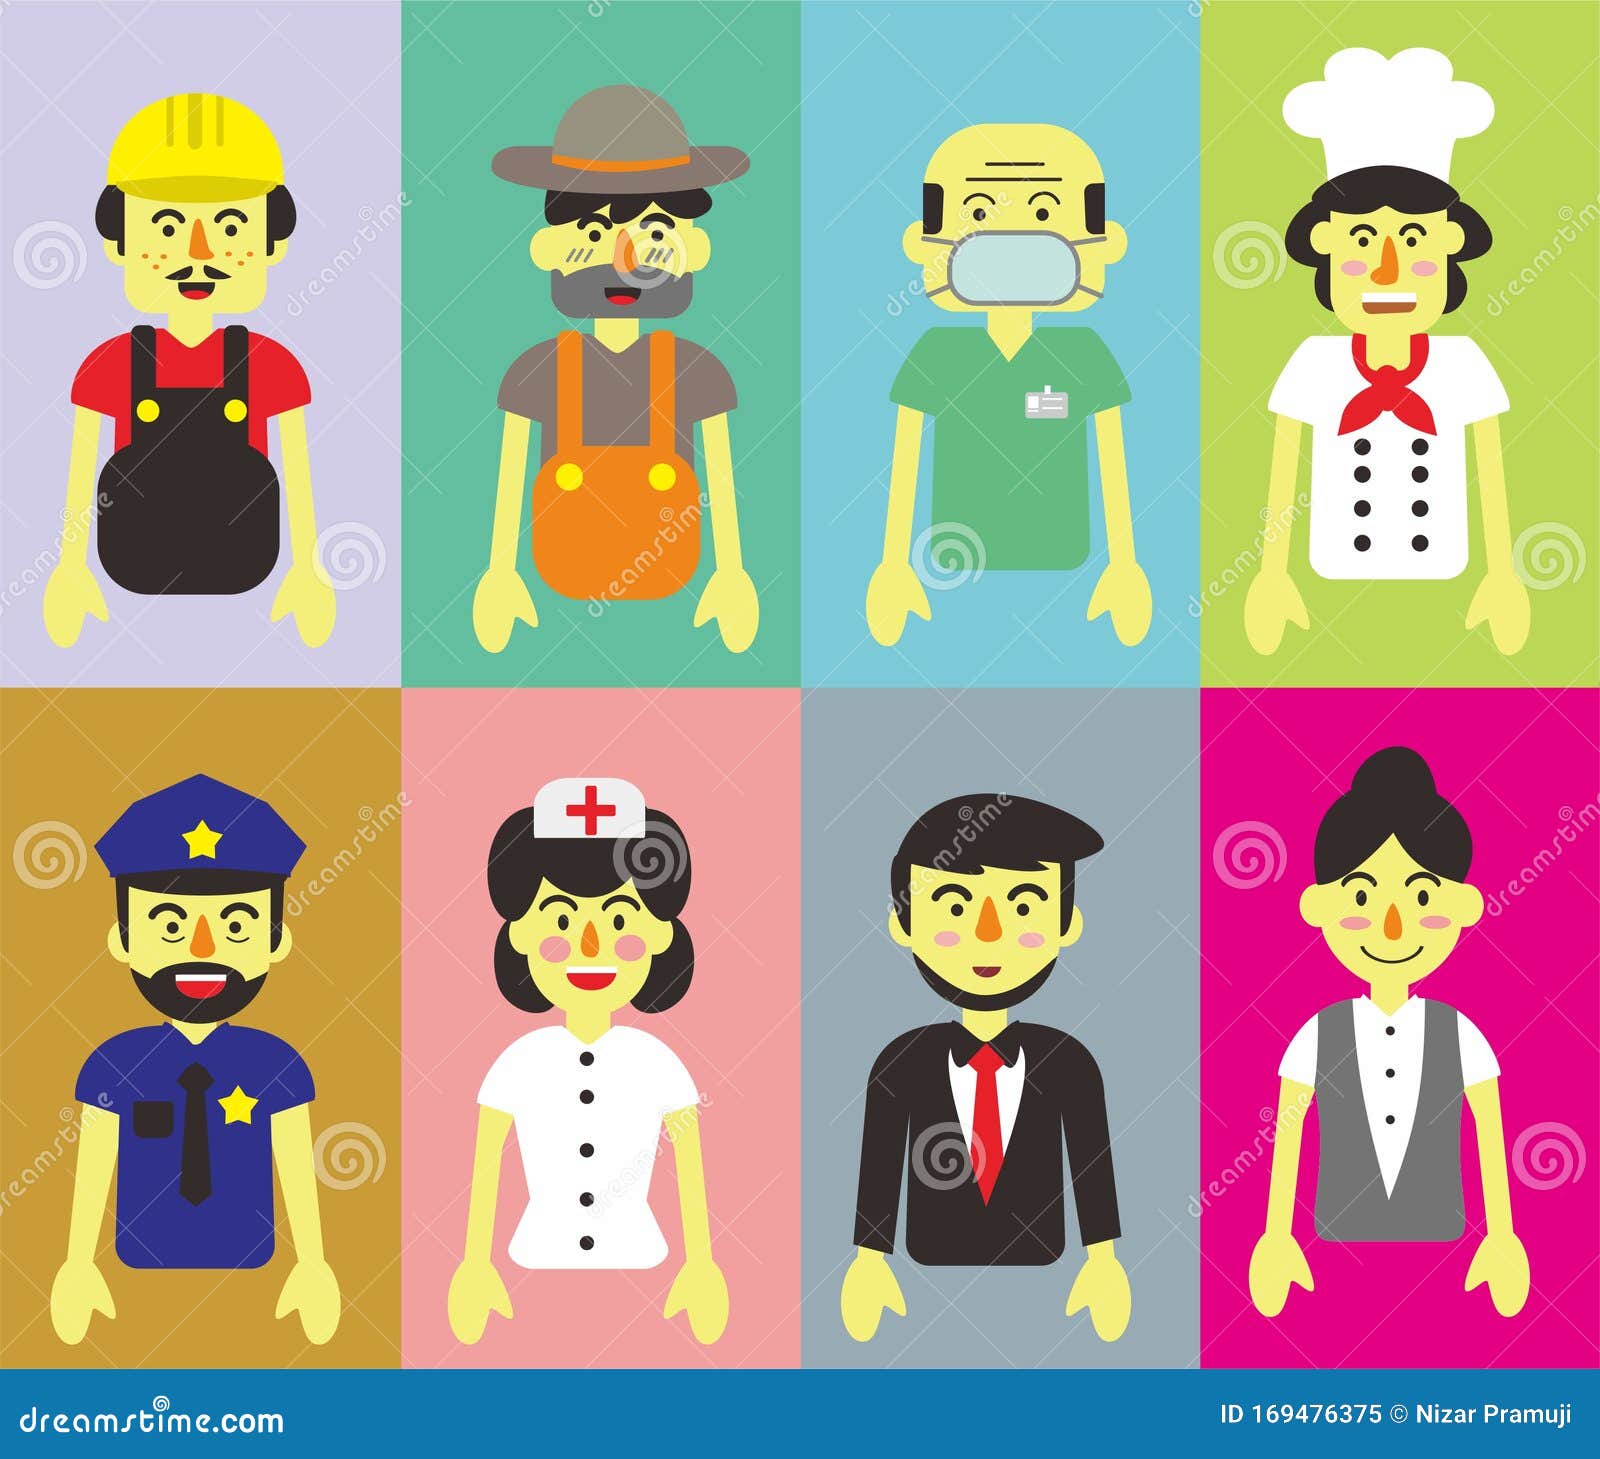 Set of People of Different Professions, Career Characters Design, Labor  Day, Cartoon Flat-style Vector Illustration Stock Vector - Illustration of  design, professions: 169476375